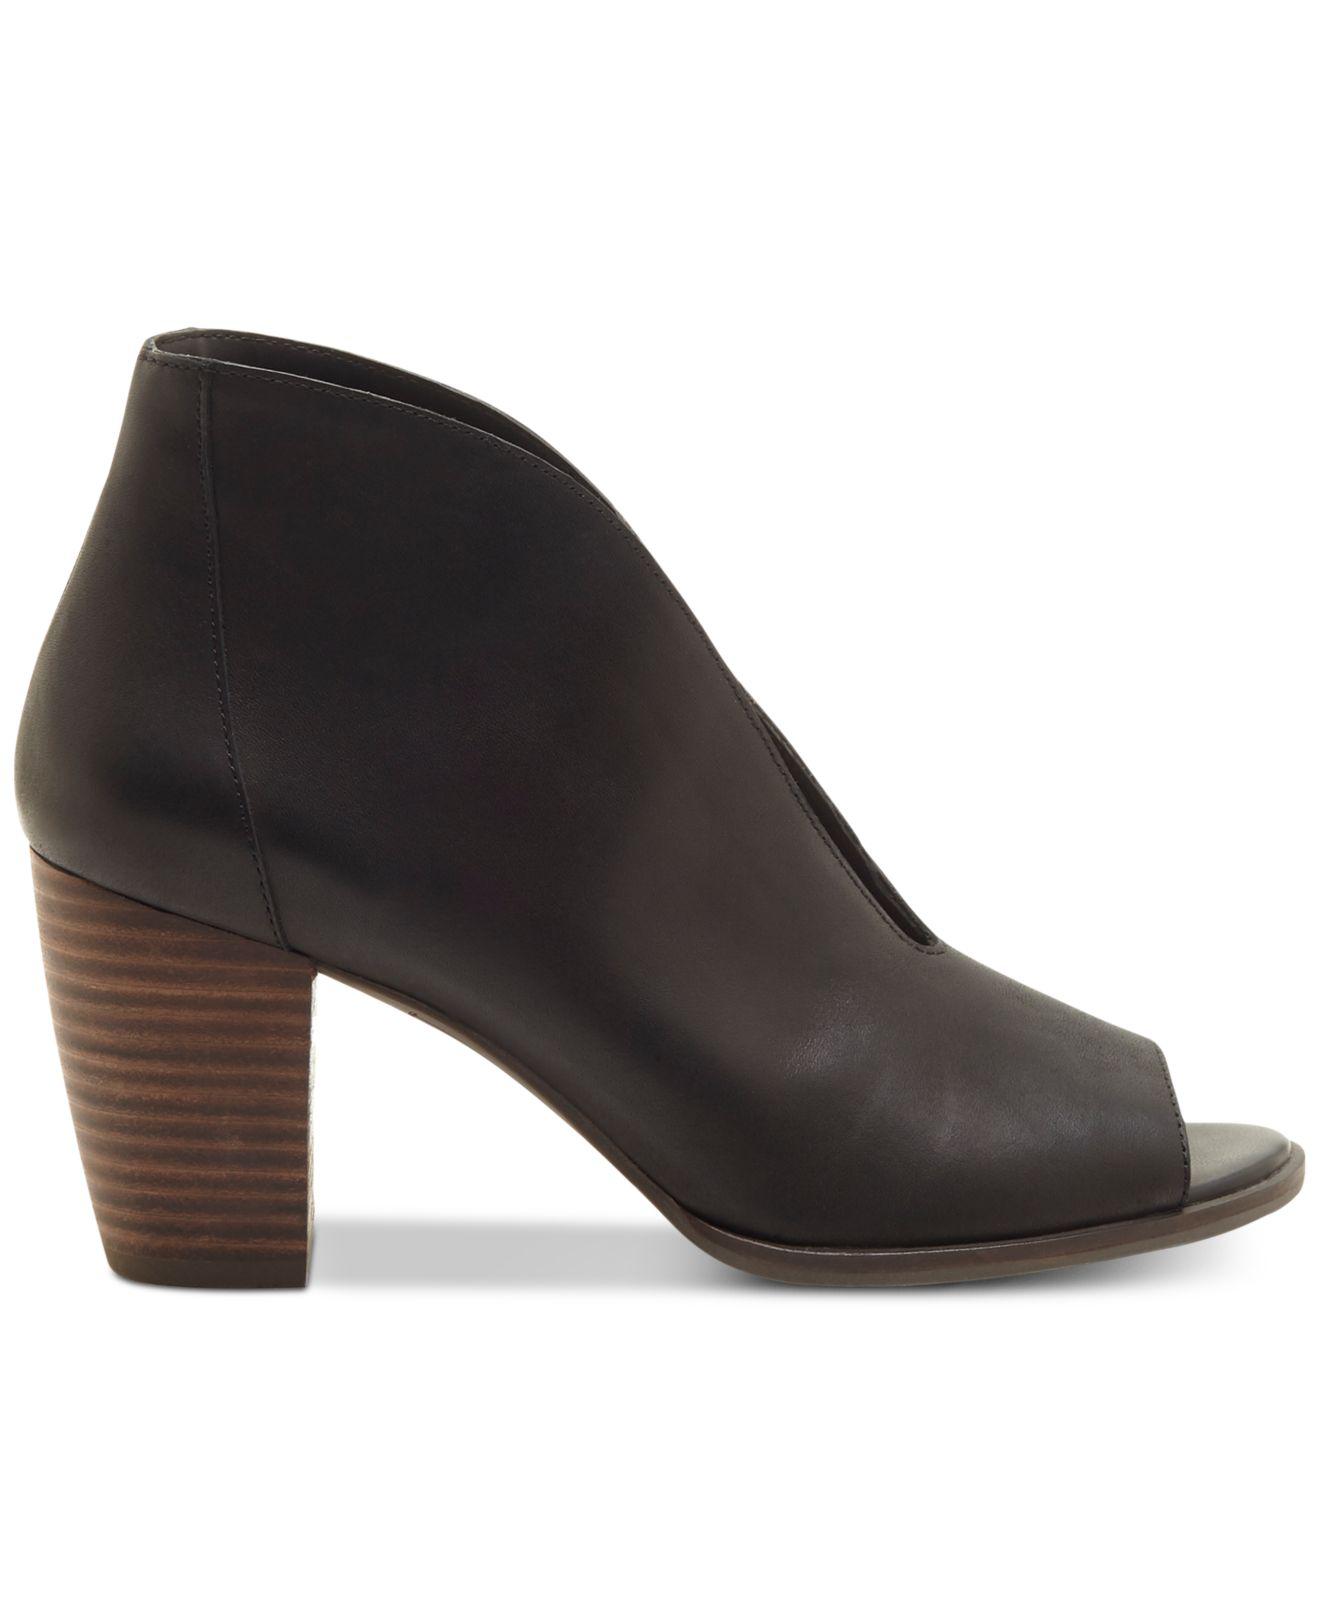 Lucky Brand Lk-joal Pump in Black - Save 31% - Lyst